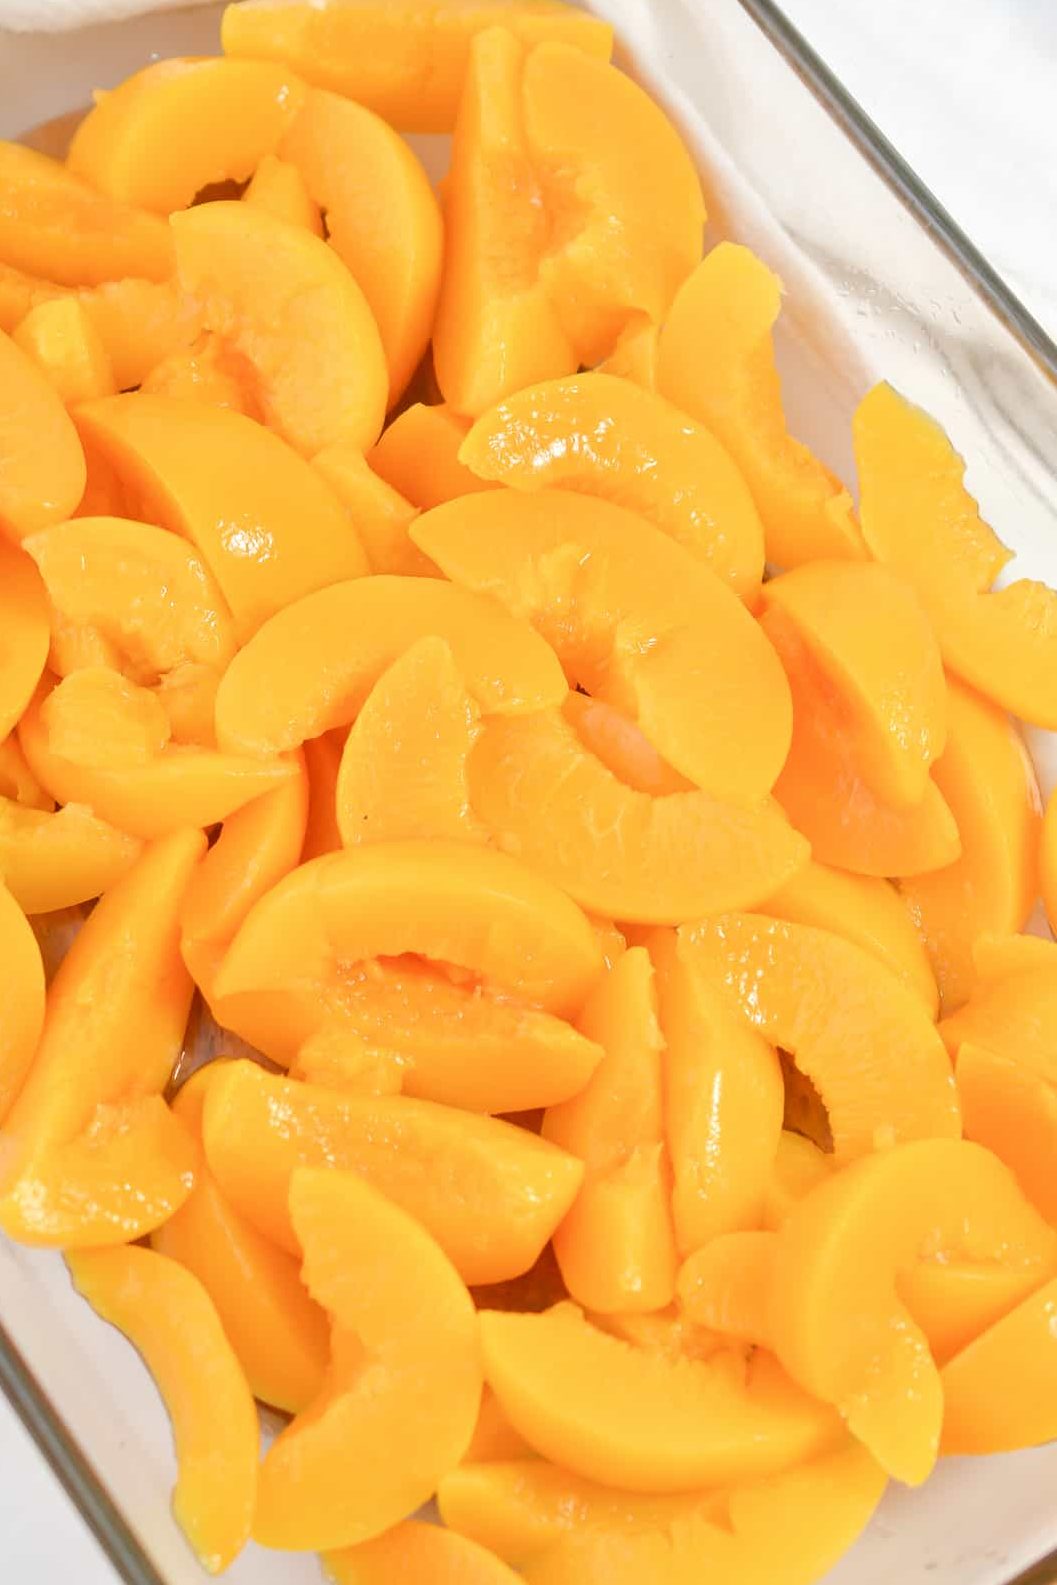 Layer the sliced peaches on the bottom of a well-greased 9x13 baking dish.